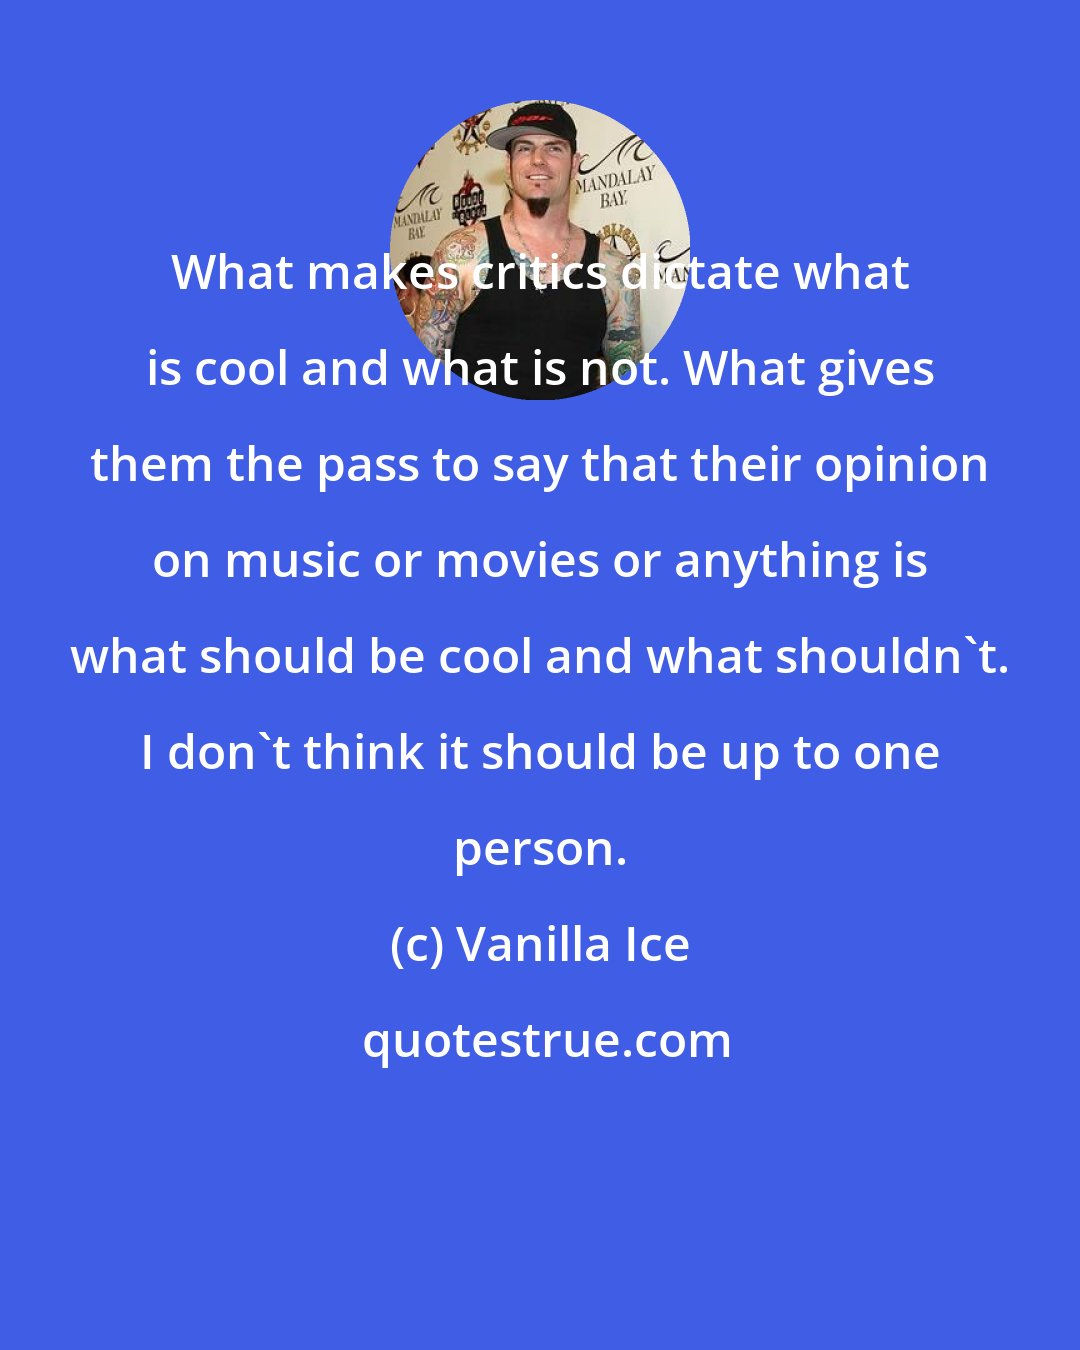 Vanilla Ice: What makes critics dictate what is cool and what is not. What gives them the pass to say that their opinion on music or movies or anything is what should be cool and what shouldn't. I don't think it should be up to one person.